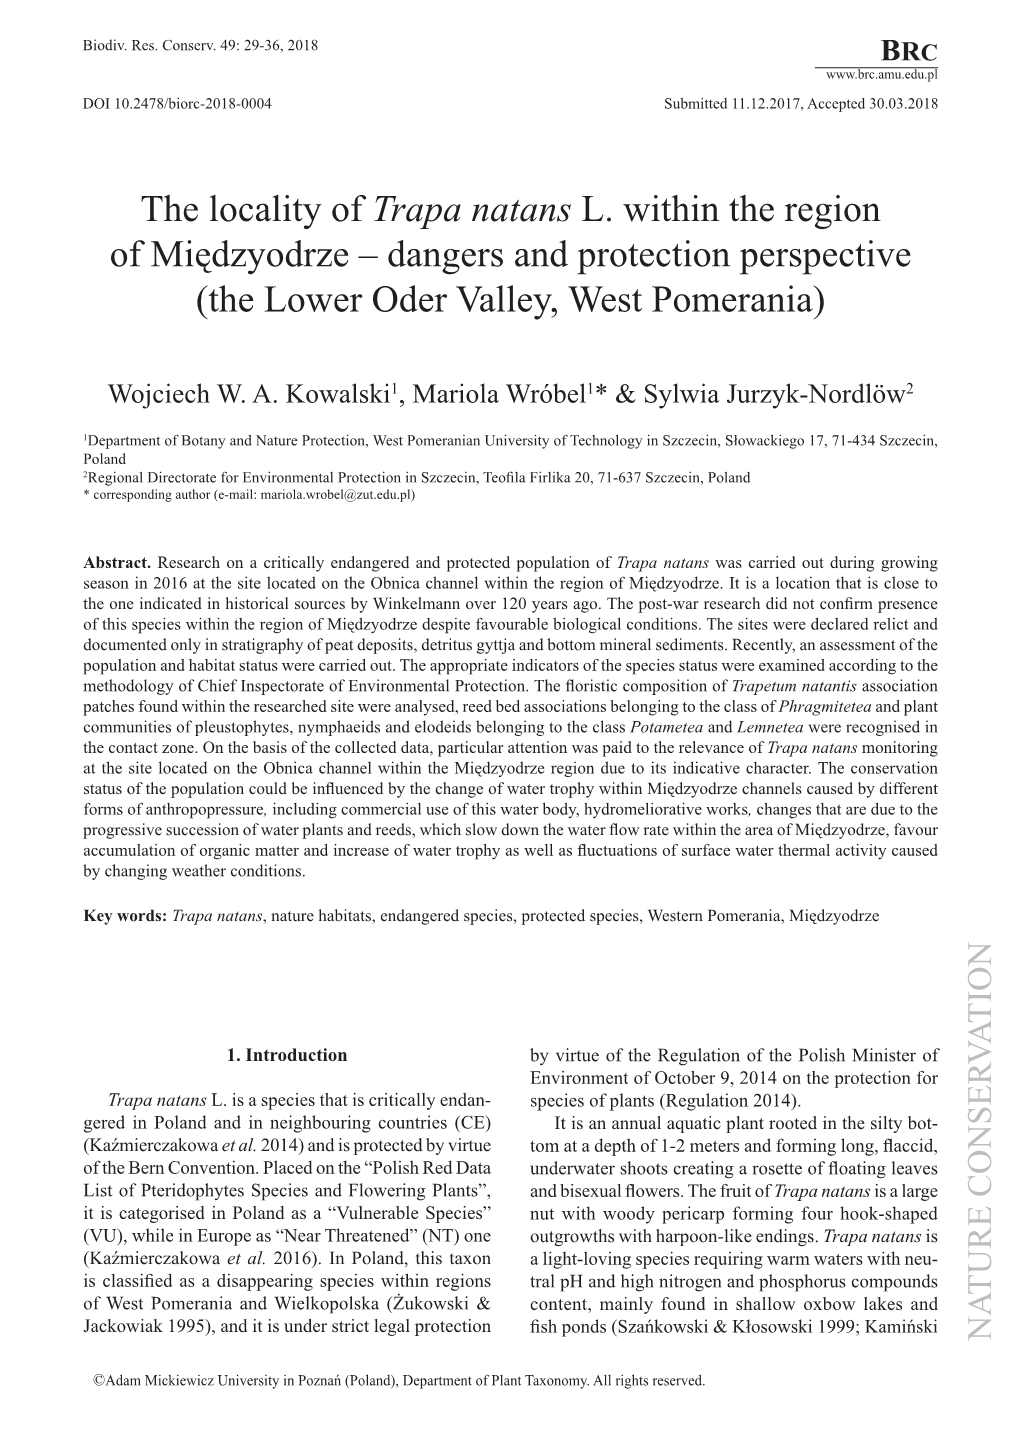 The Locality of Trapa Natans L. Within the Region of Międzyodrze – Dangers and Protection Perspective (The Lower Oder Valley, West Pomerania)